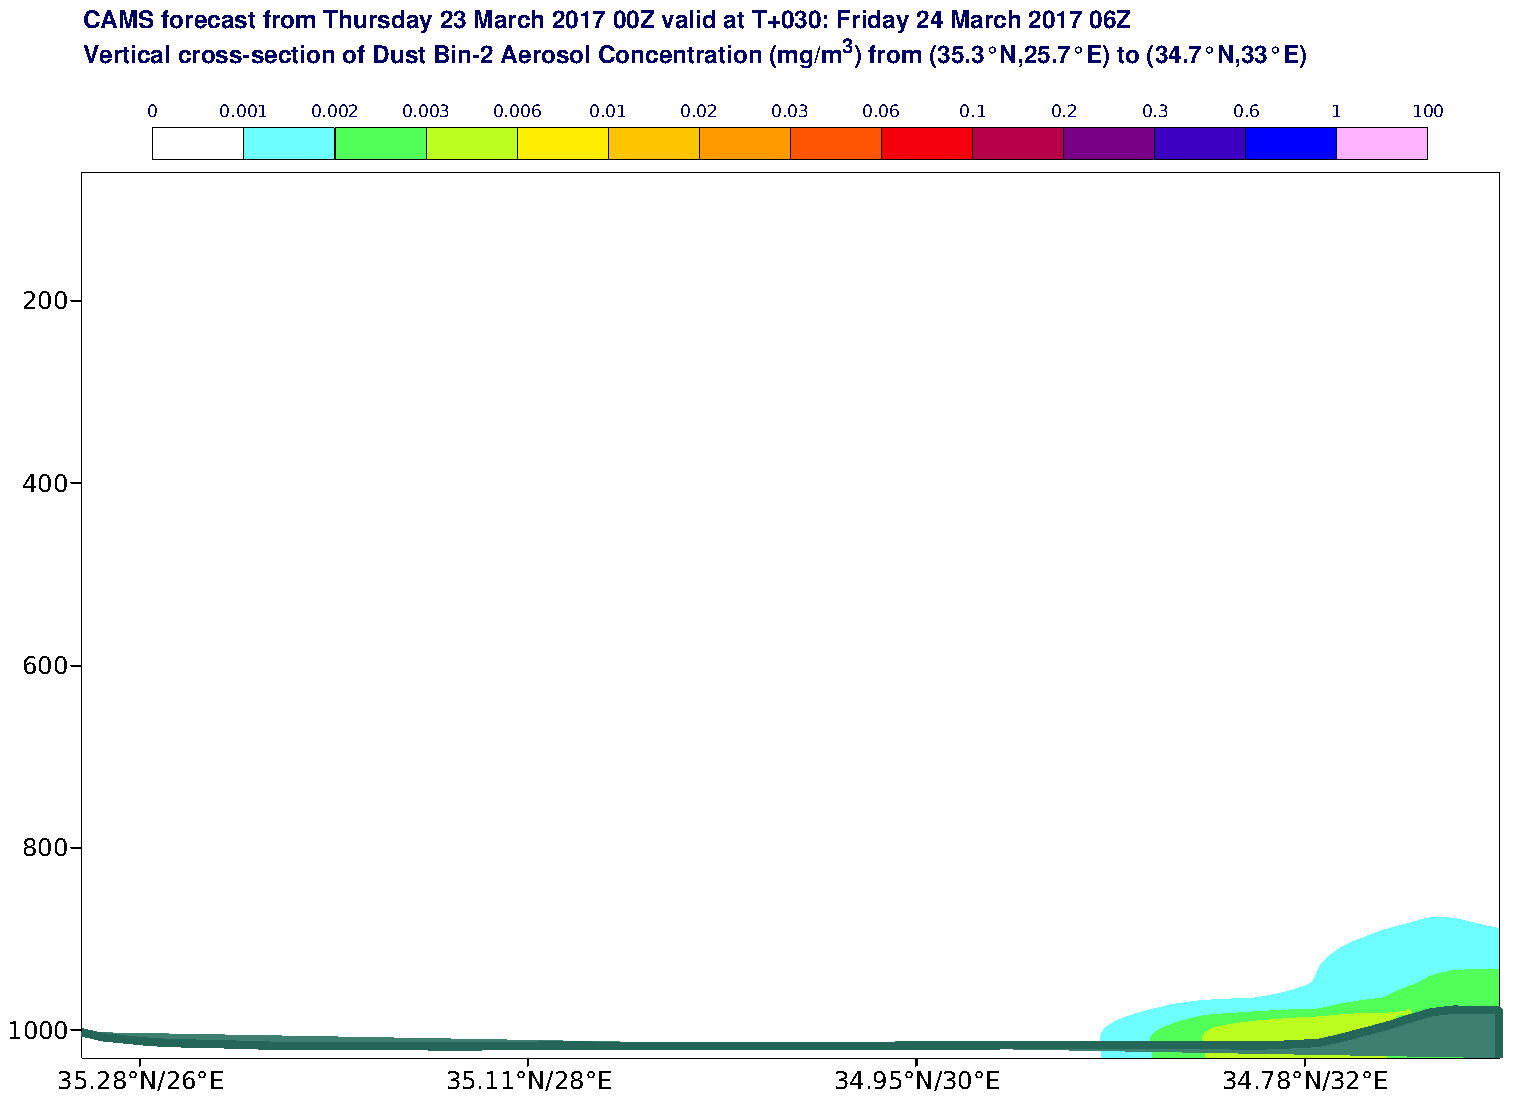 Vertical cross-section of Dust Bin-2 Aerosol Concentration (mg/m3) valid at T30 - 2017-03-24 06:00